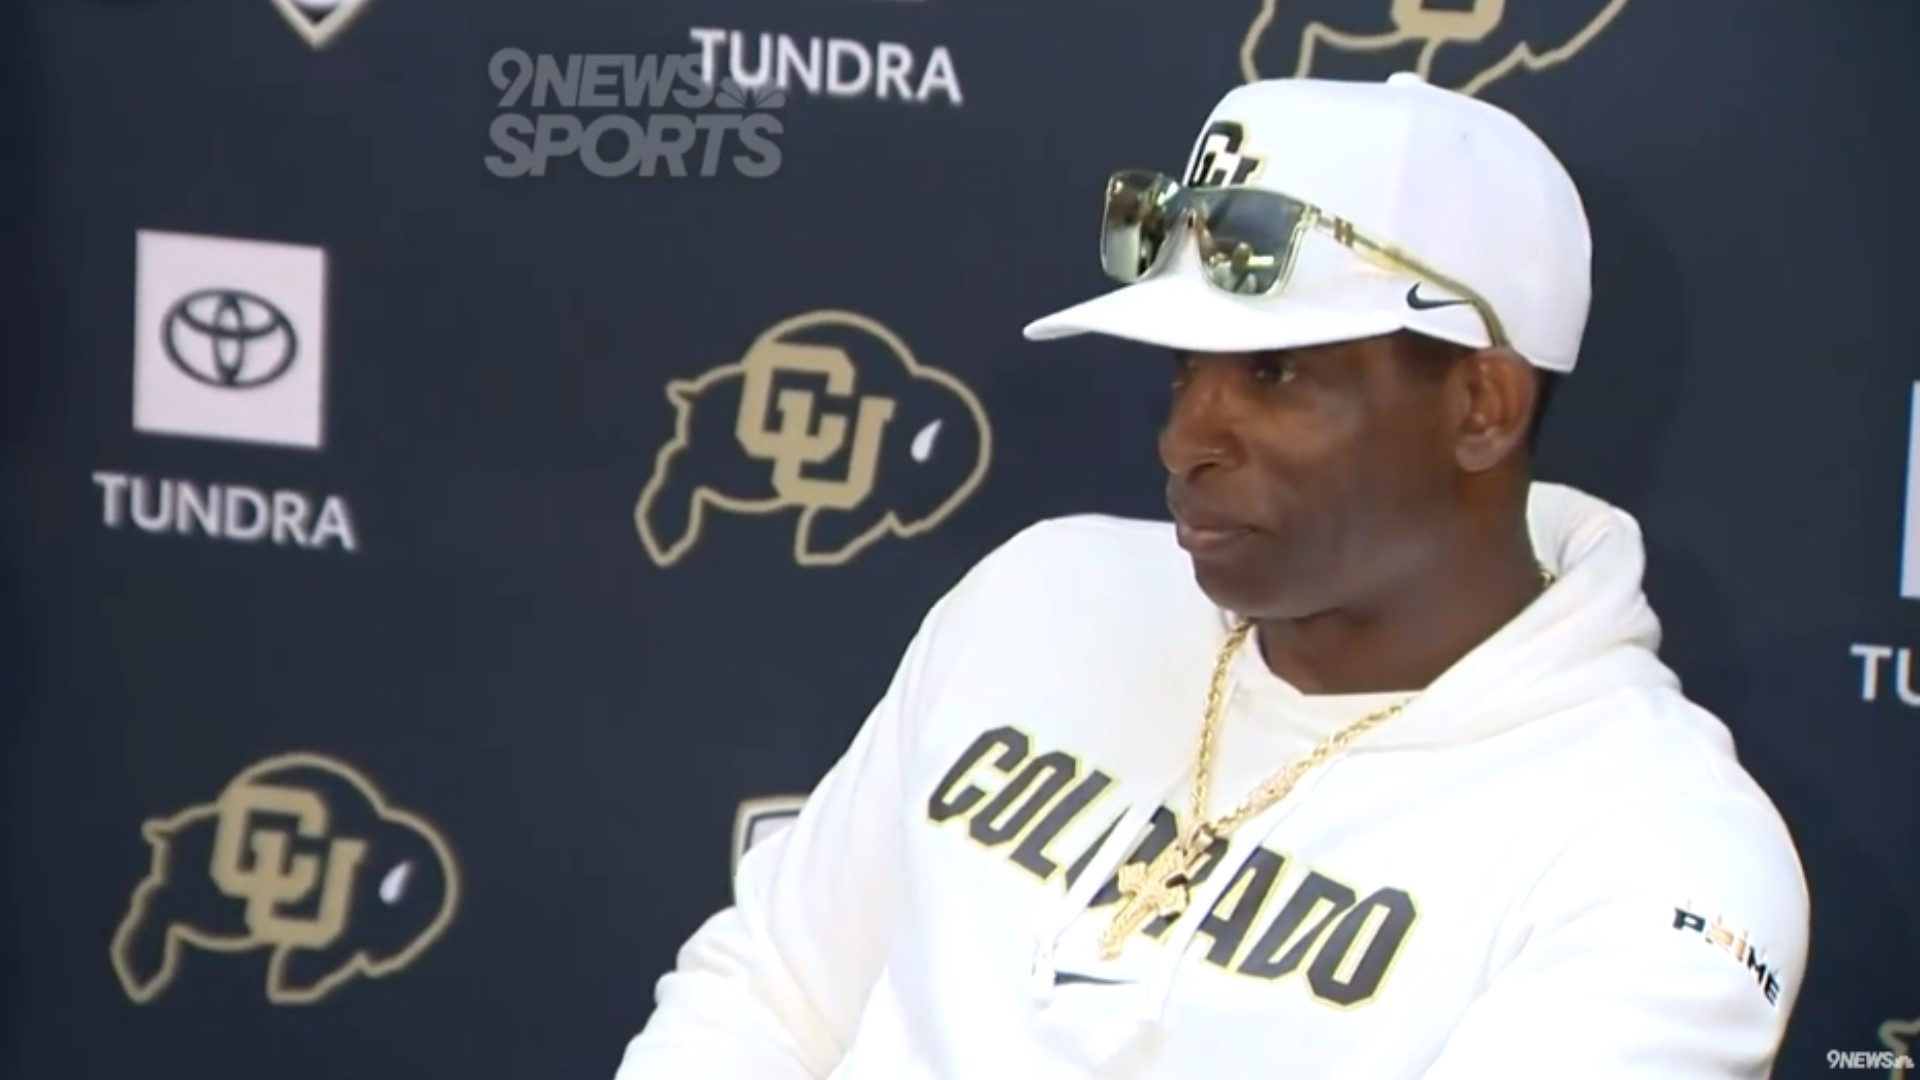 "Do you believe now? You don't believe. Next question." Coach Prime said he kept receipts of those who doubted CU.